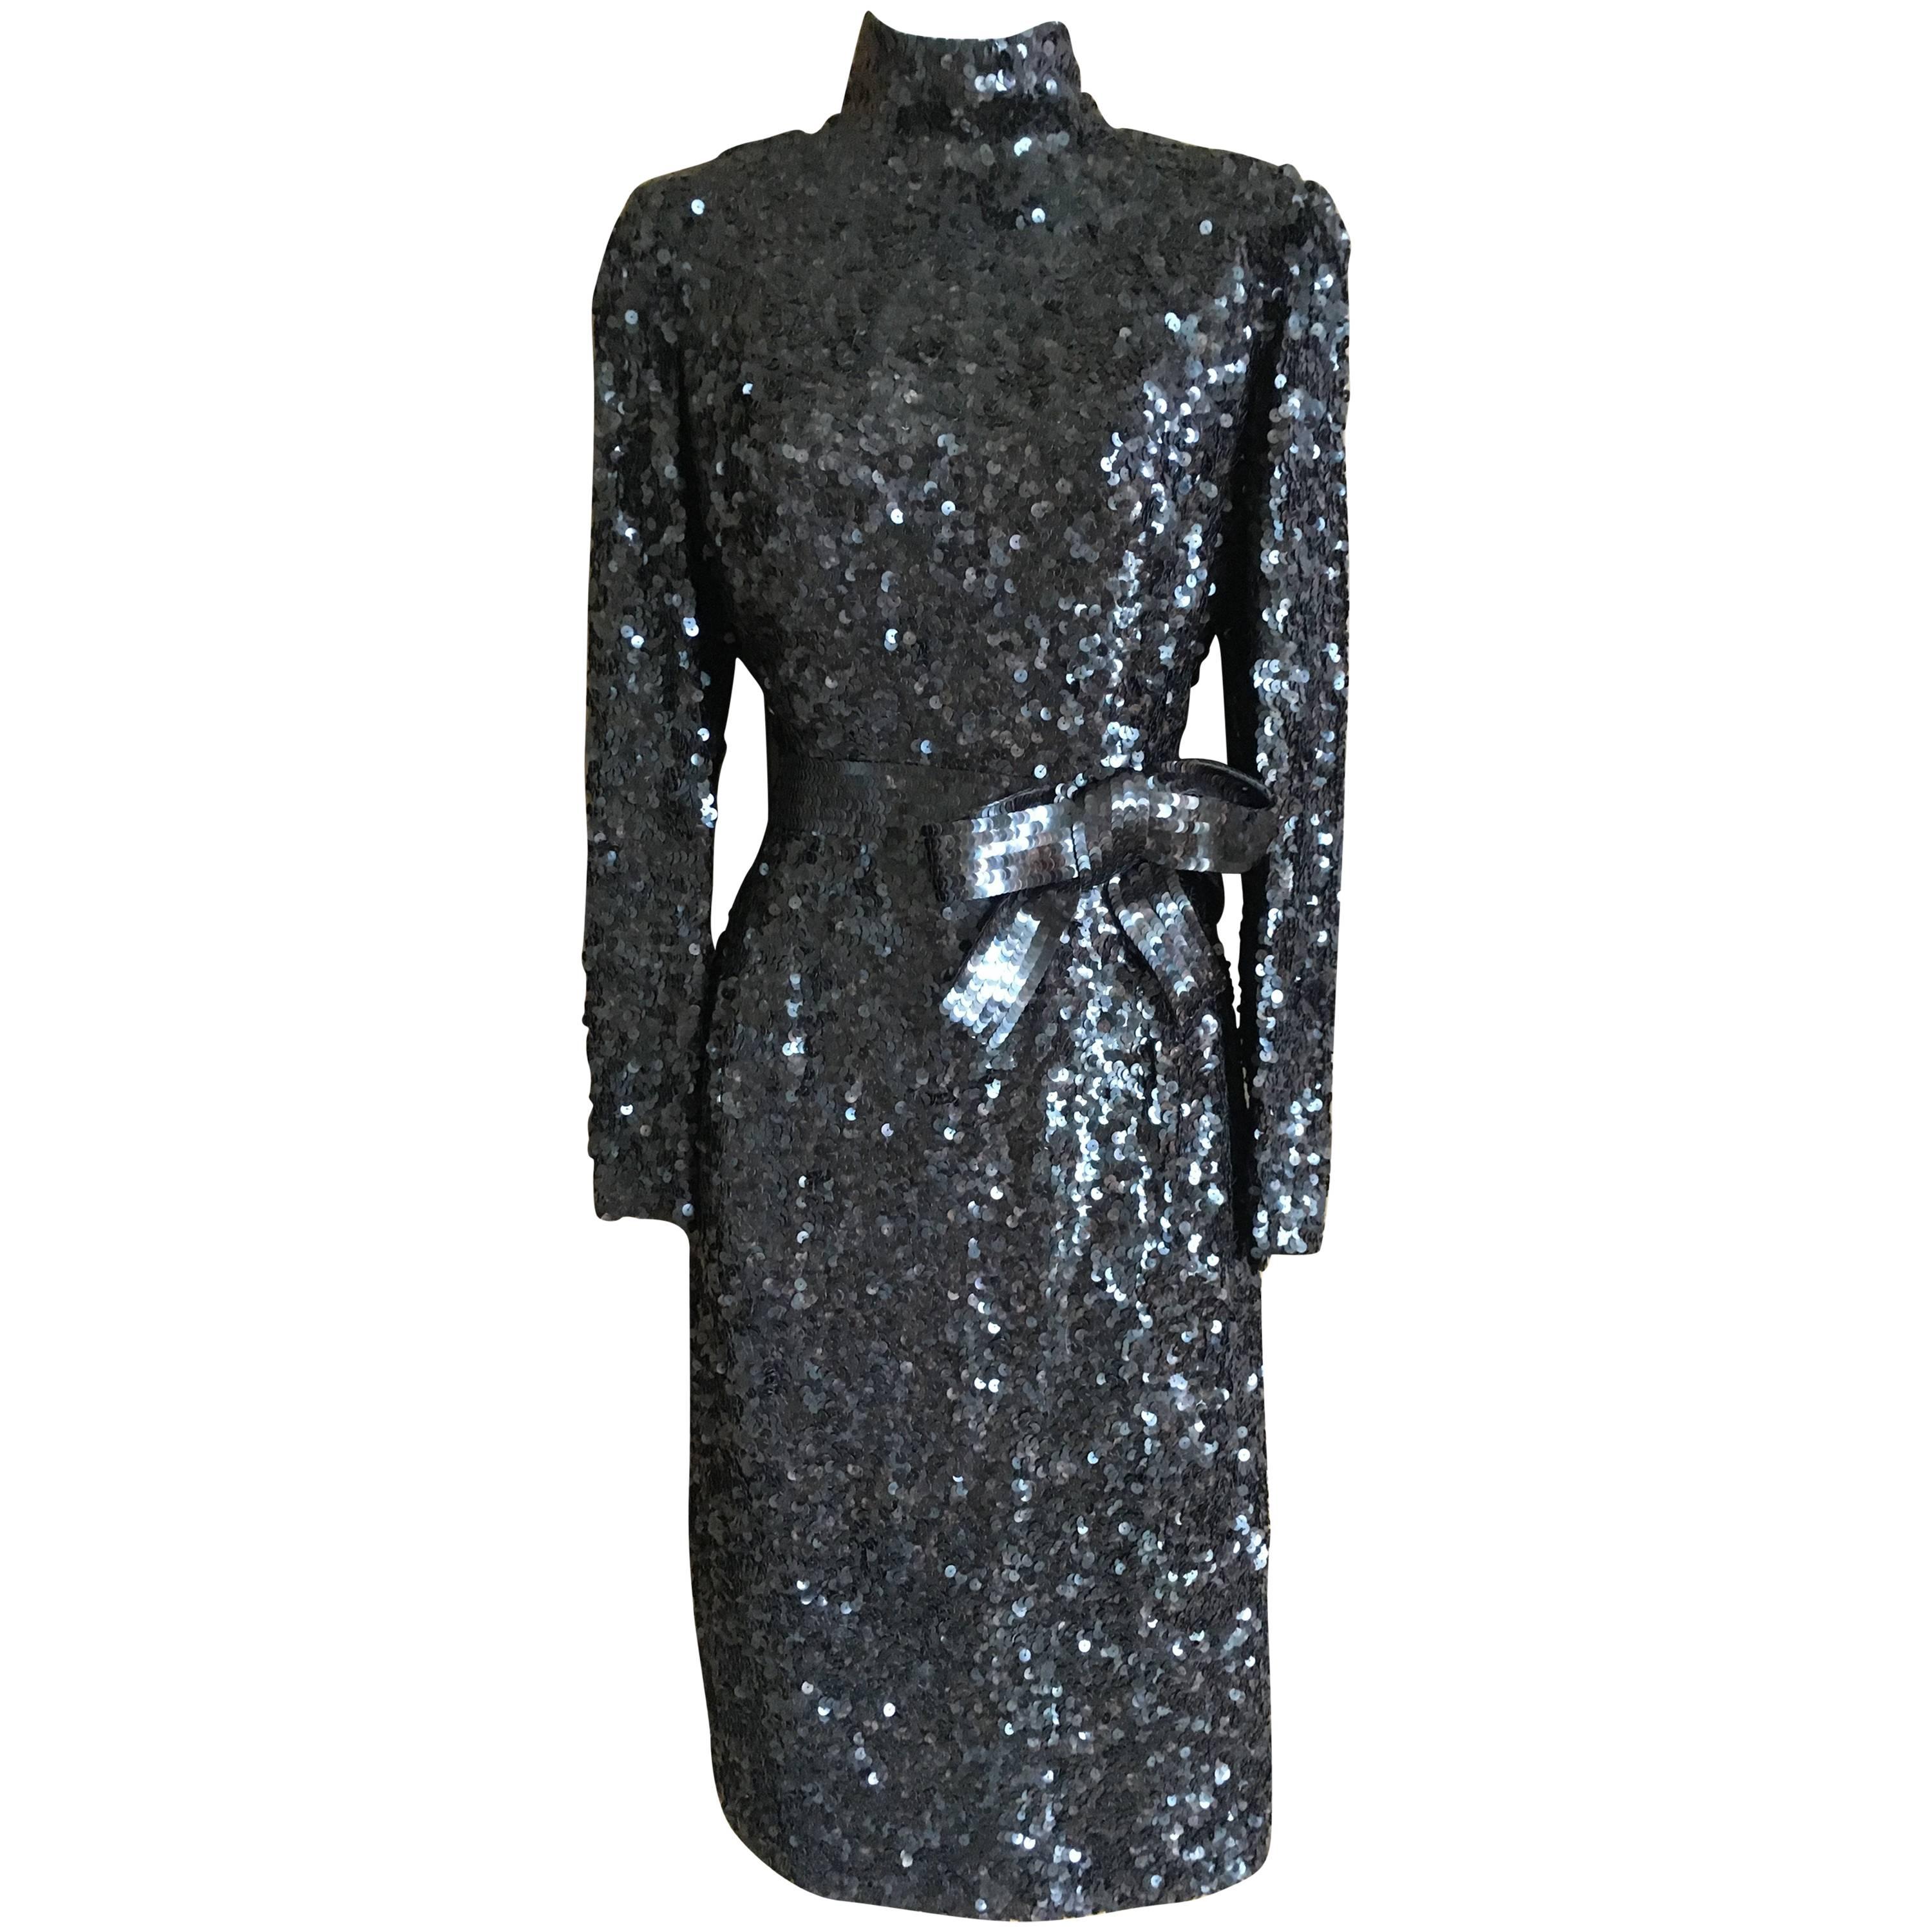 Norman Norell 1960's Sequin Cocktail Dress with Attached Bow Belt For Sale